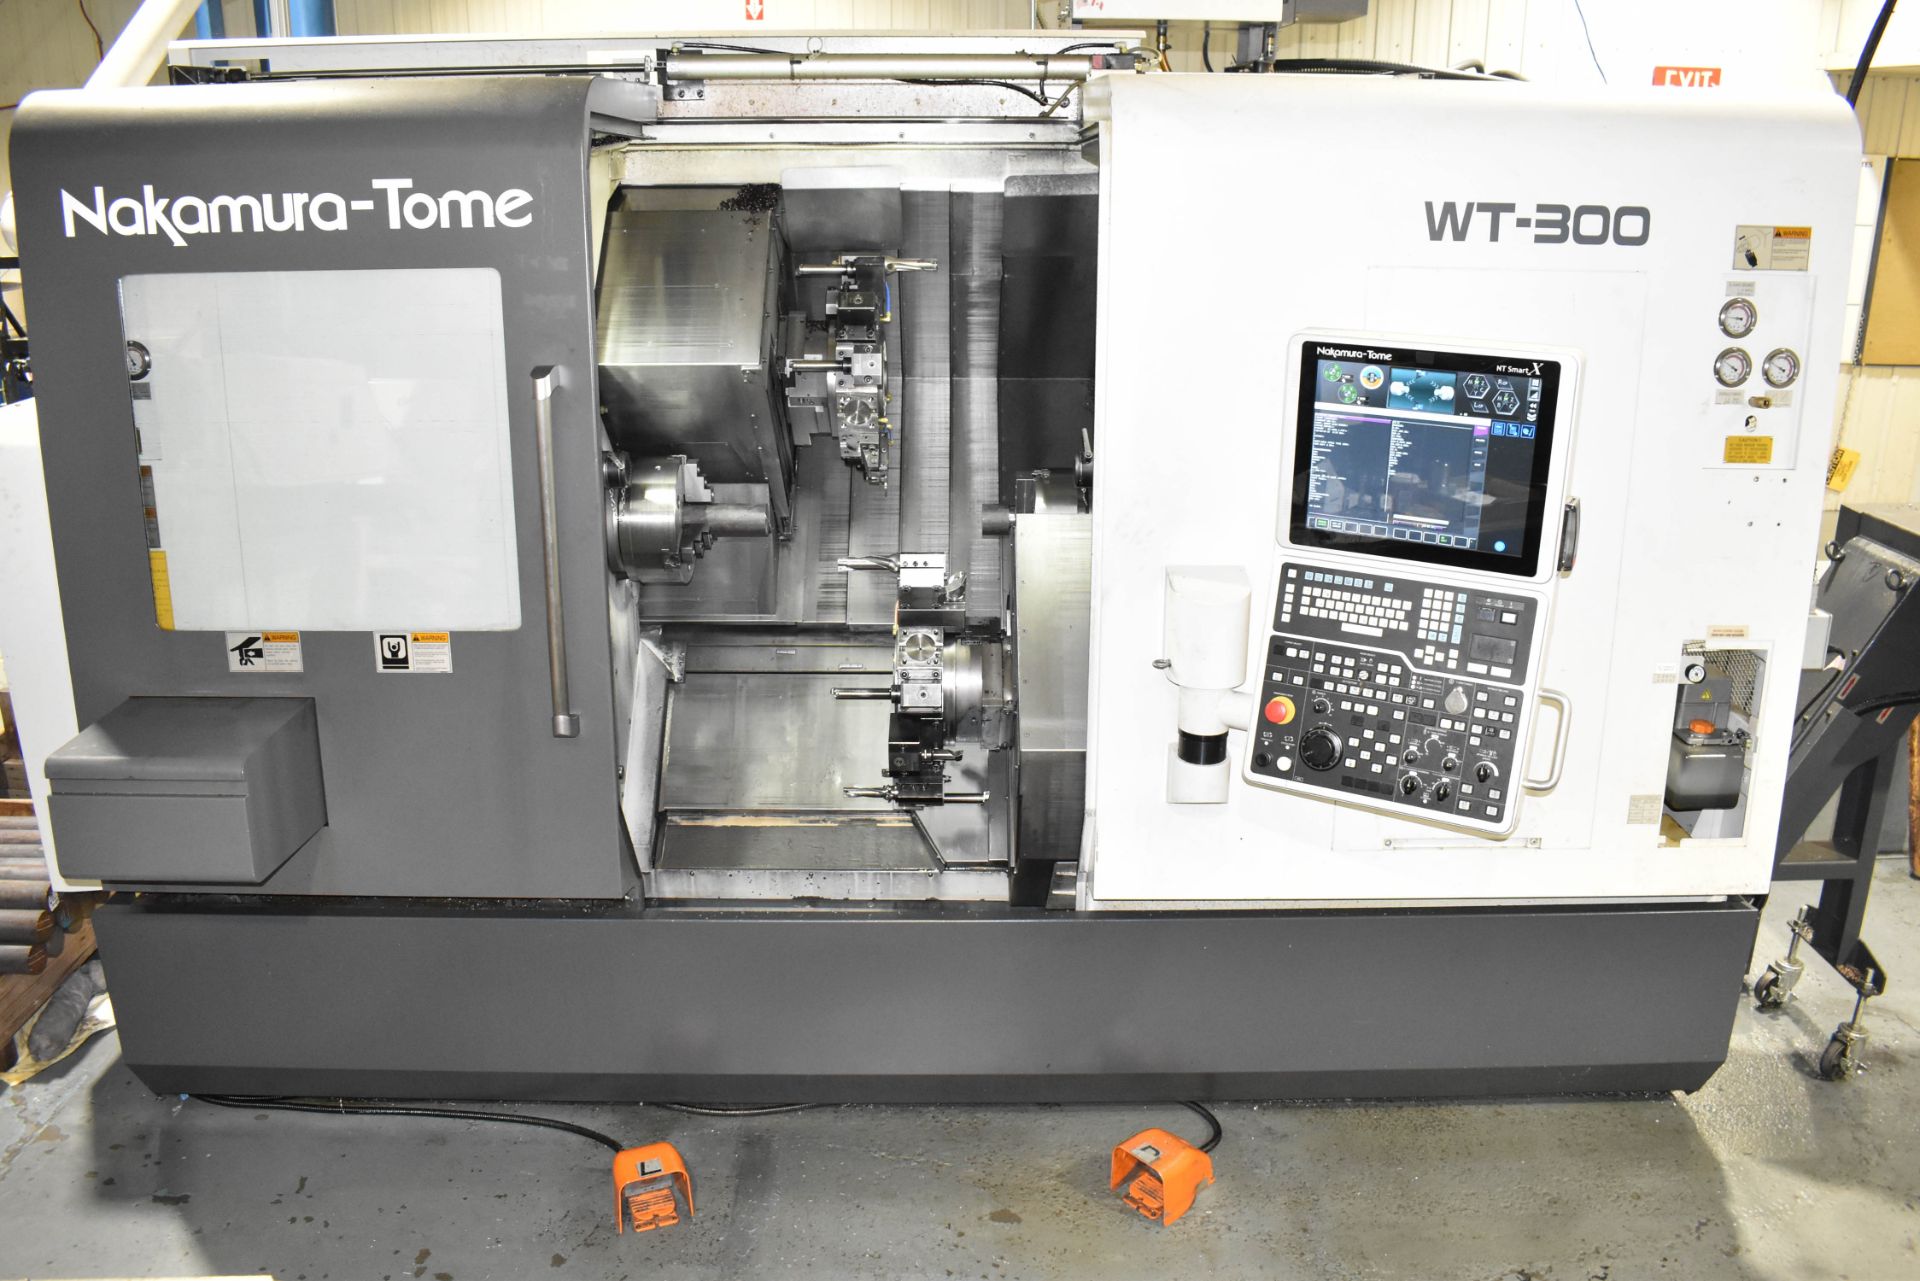 NAKAMURA-TOME (2018) WT-300 MULTI-AXIS OPPOSED SPINDLE AND TWIN TURRET CNC MULTI-TASKING CENTER WITH